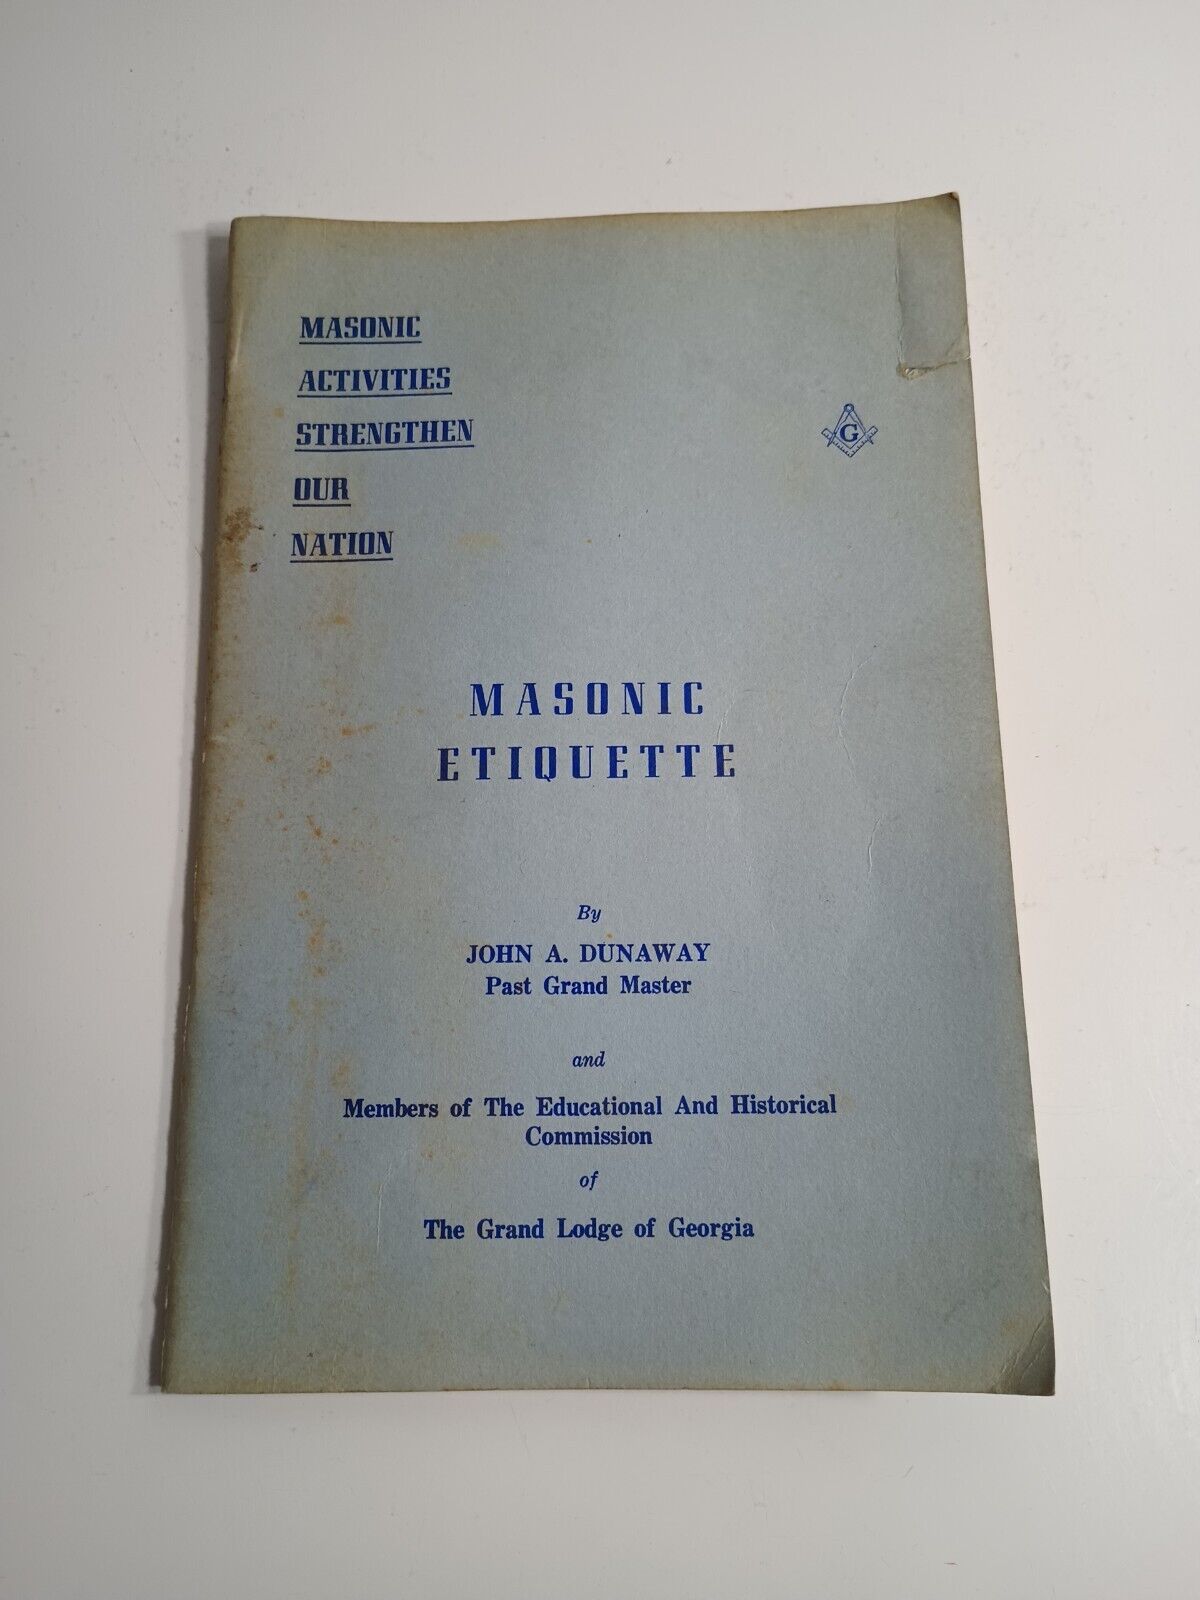 Masonic Etiquette By John A Dunaway Booklet F. & A.M.